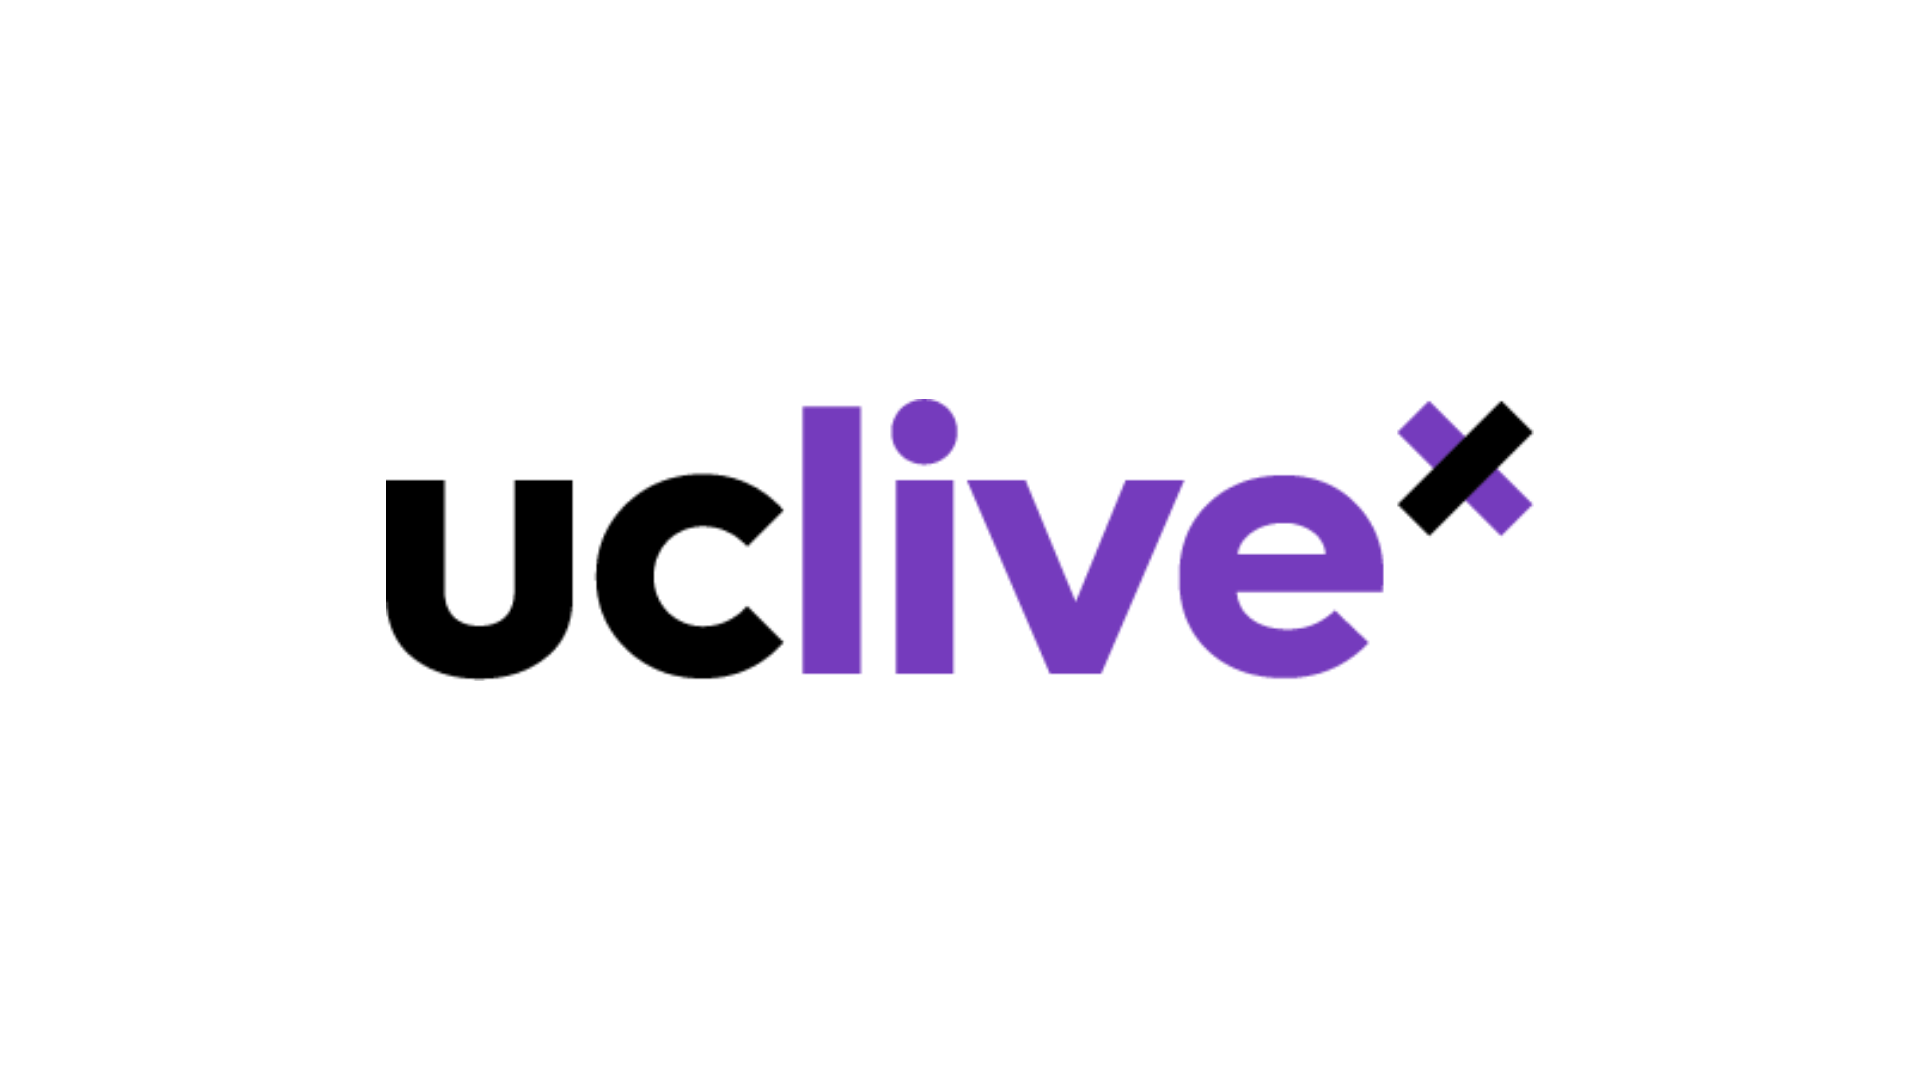 The word 'UCLivex' appears as a logo. The 'UC' portion appears in black while the 'live' portion appears in purple. The 'x' is indexed above the 'e' of 'live' and is both black and purple.. 